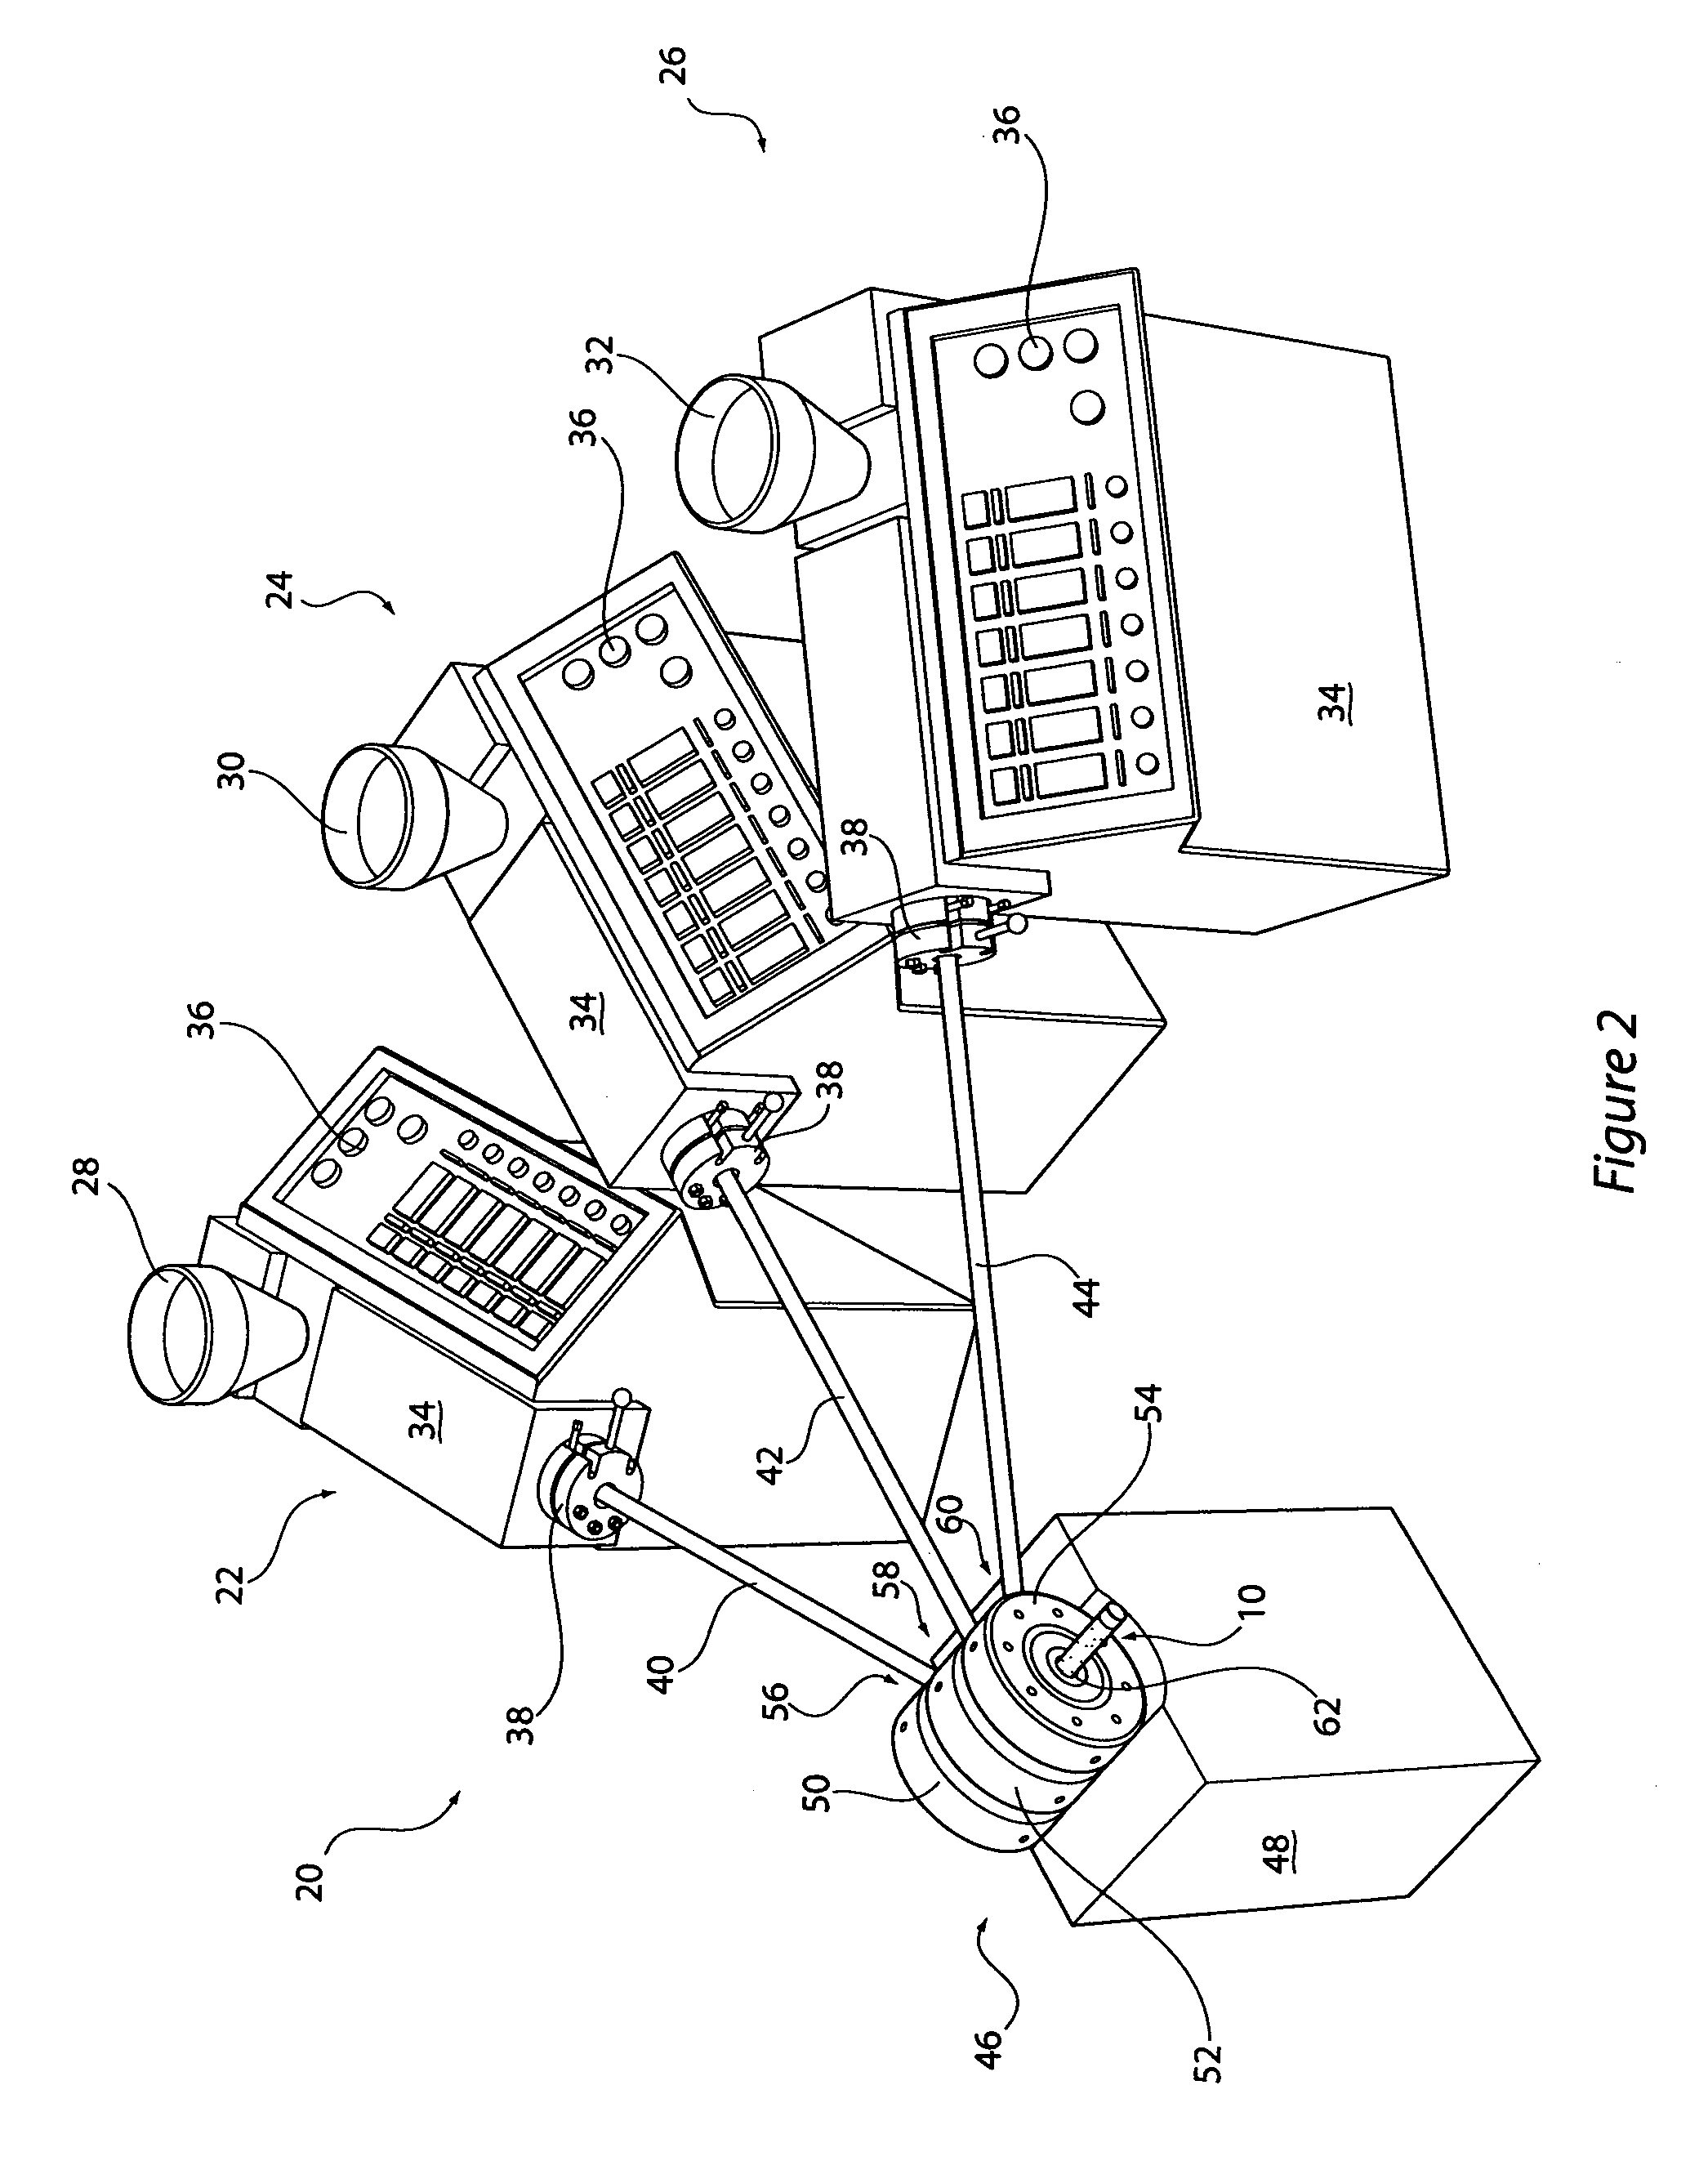 Apparatus and method of producing porous membranes